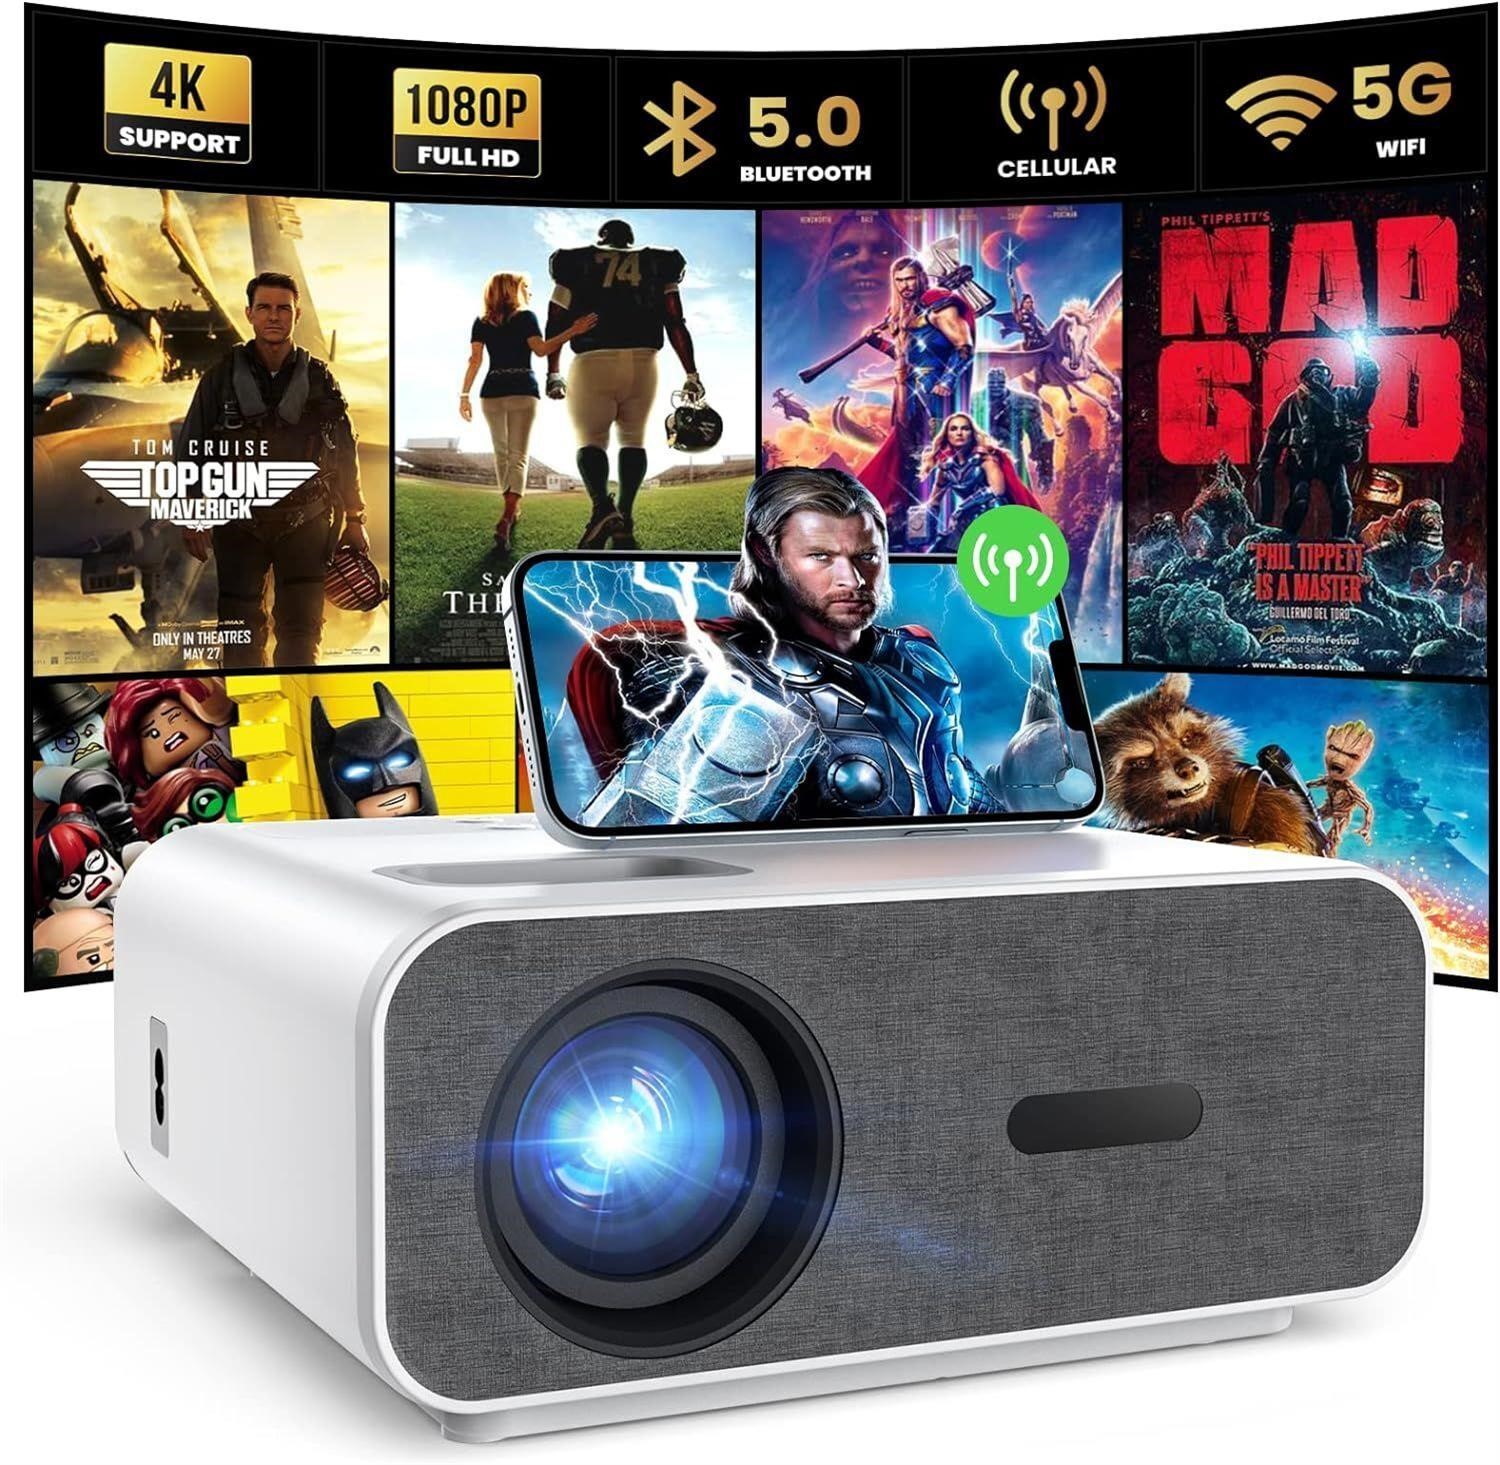 $150 4K WIFI and Bluetooth Projector